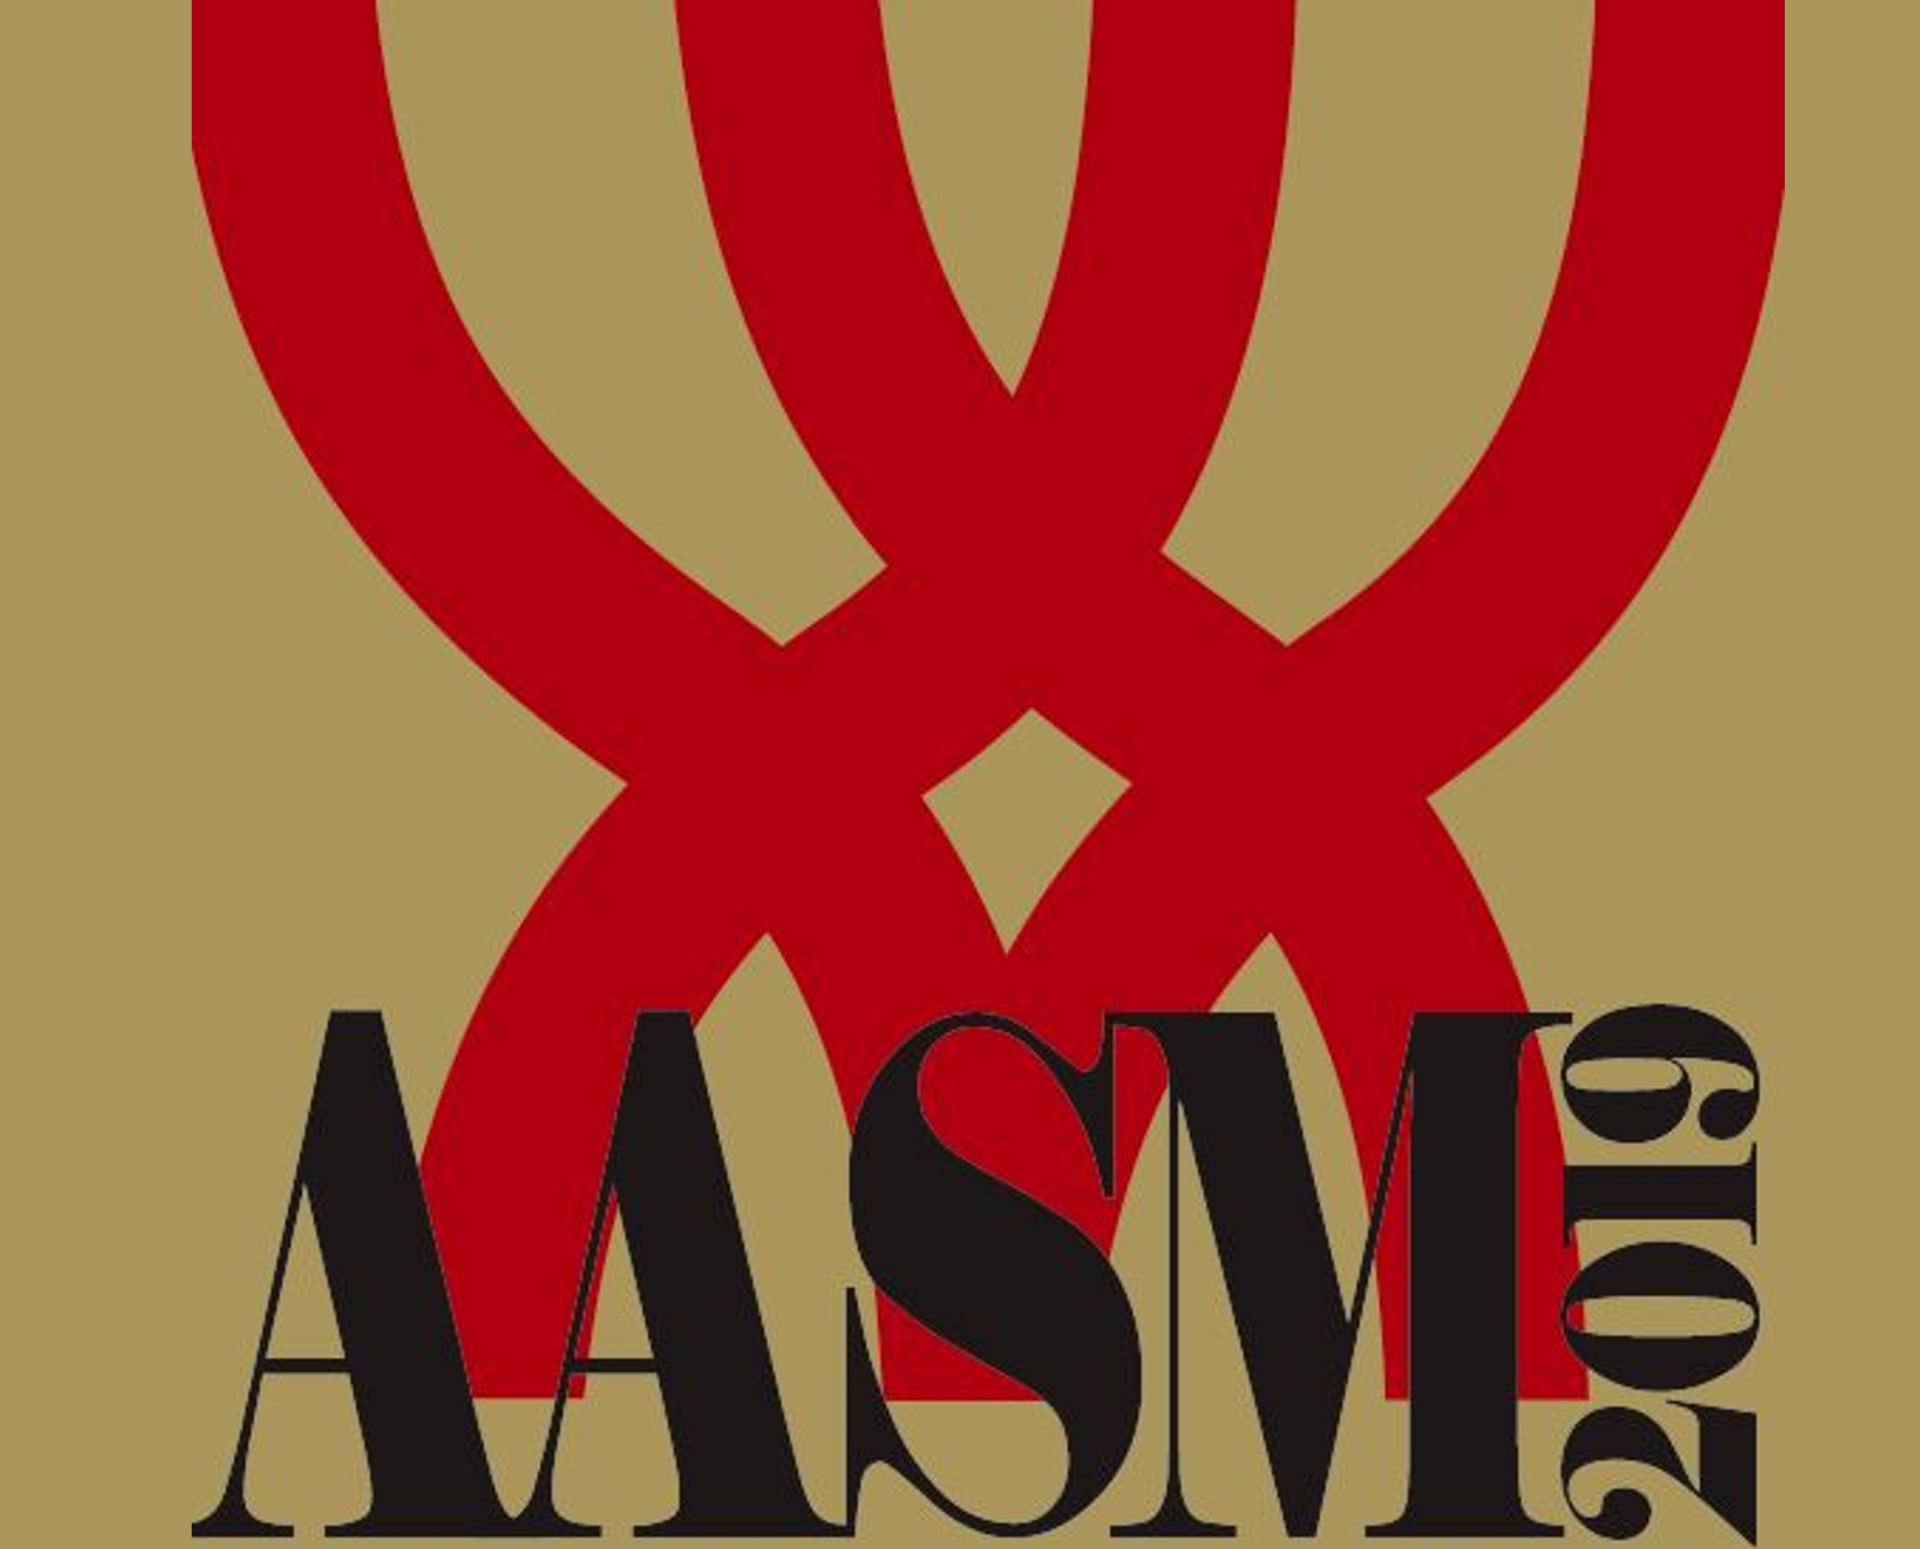 Report on the “Women in Sport at AASM2019” Session and the “AASM2019 Conference”